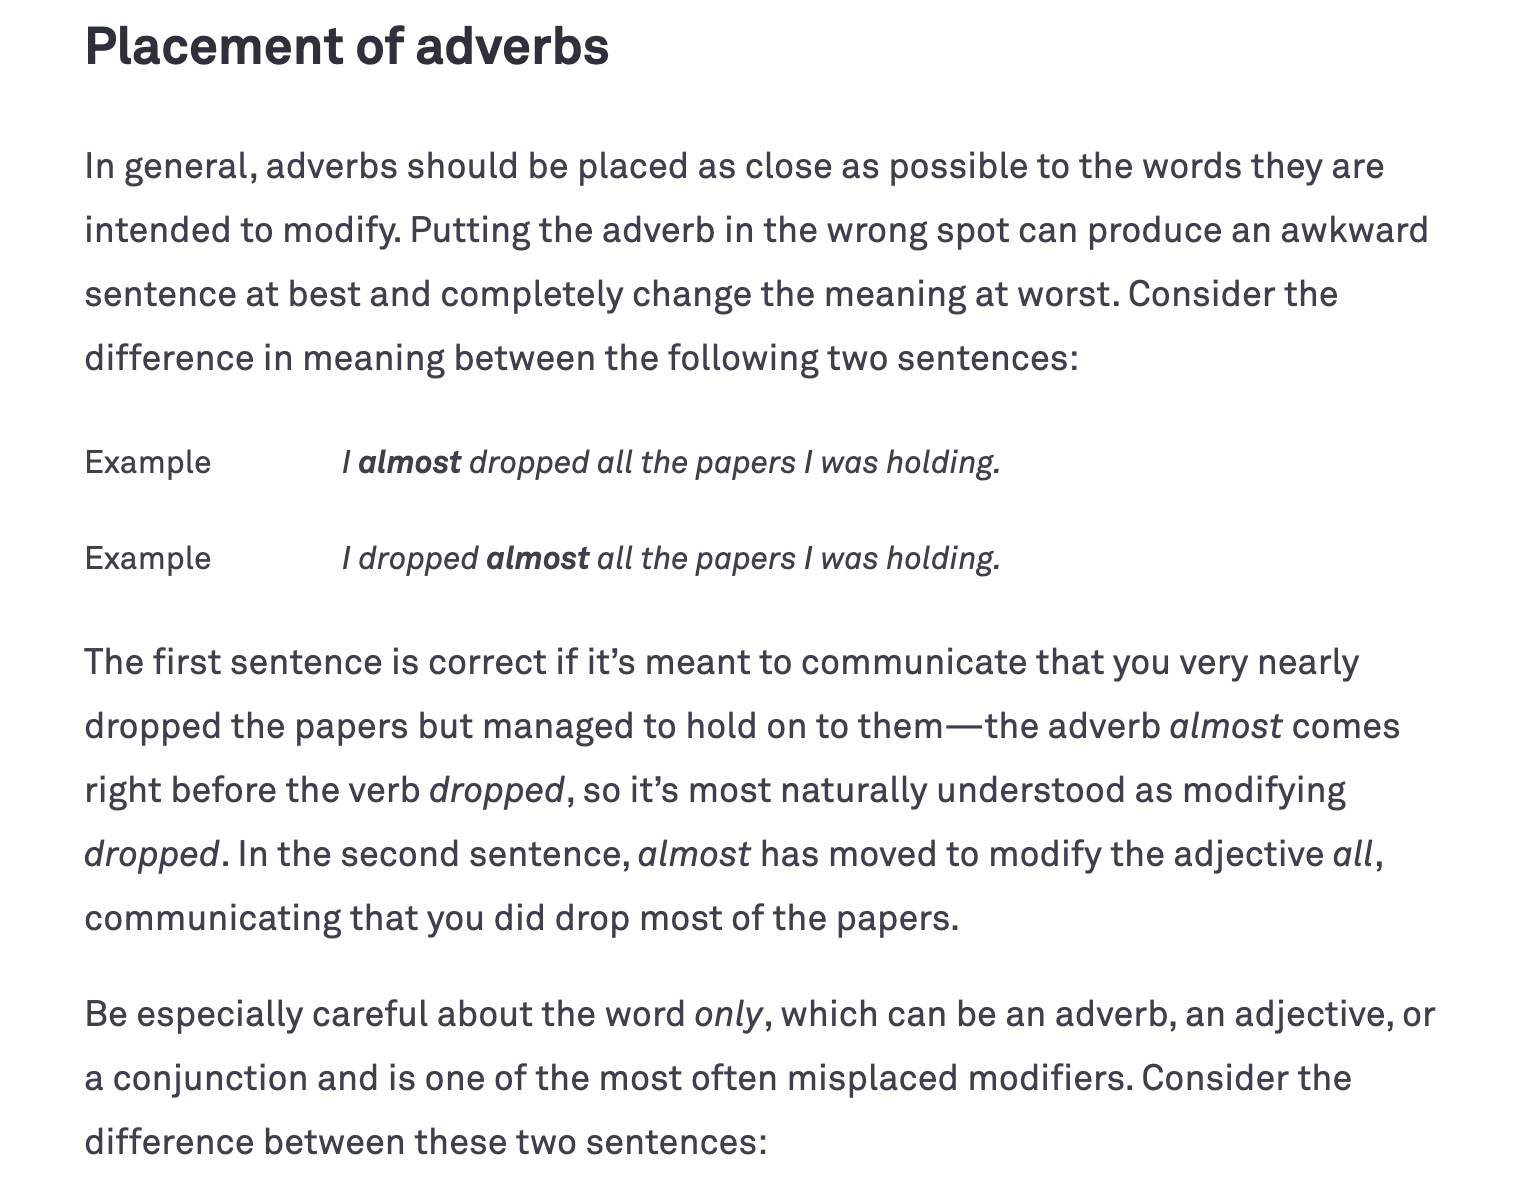 Grammarly blog post explaining how to place adverbs